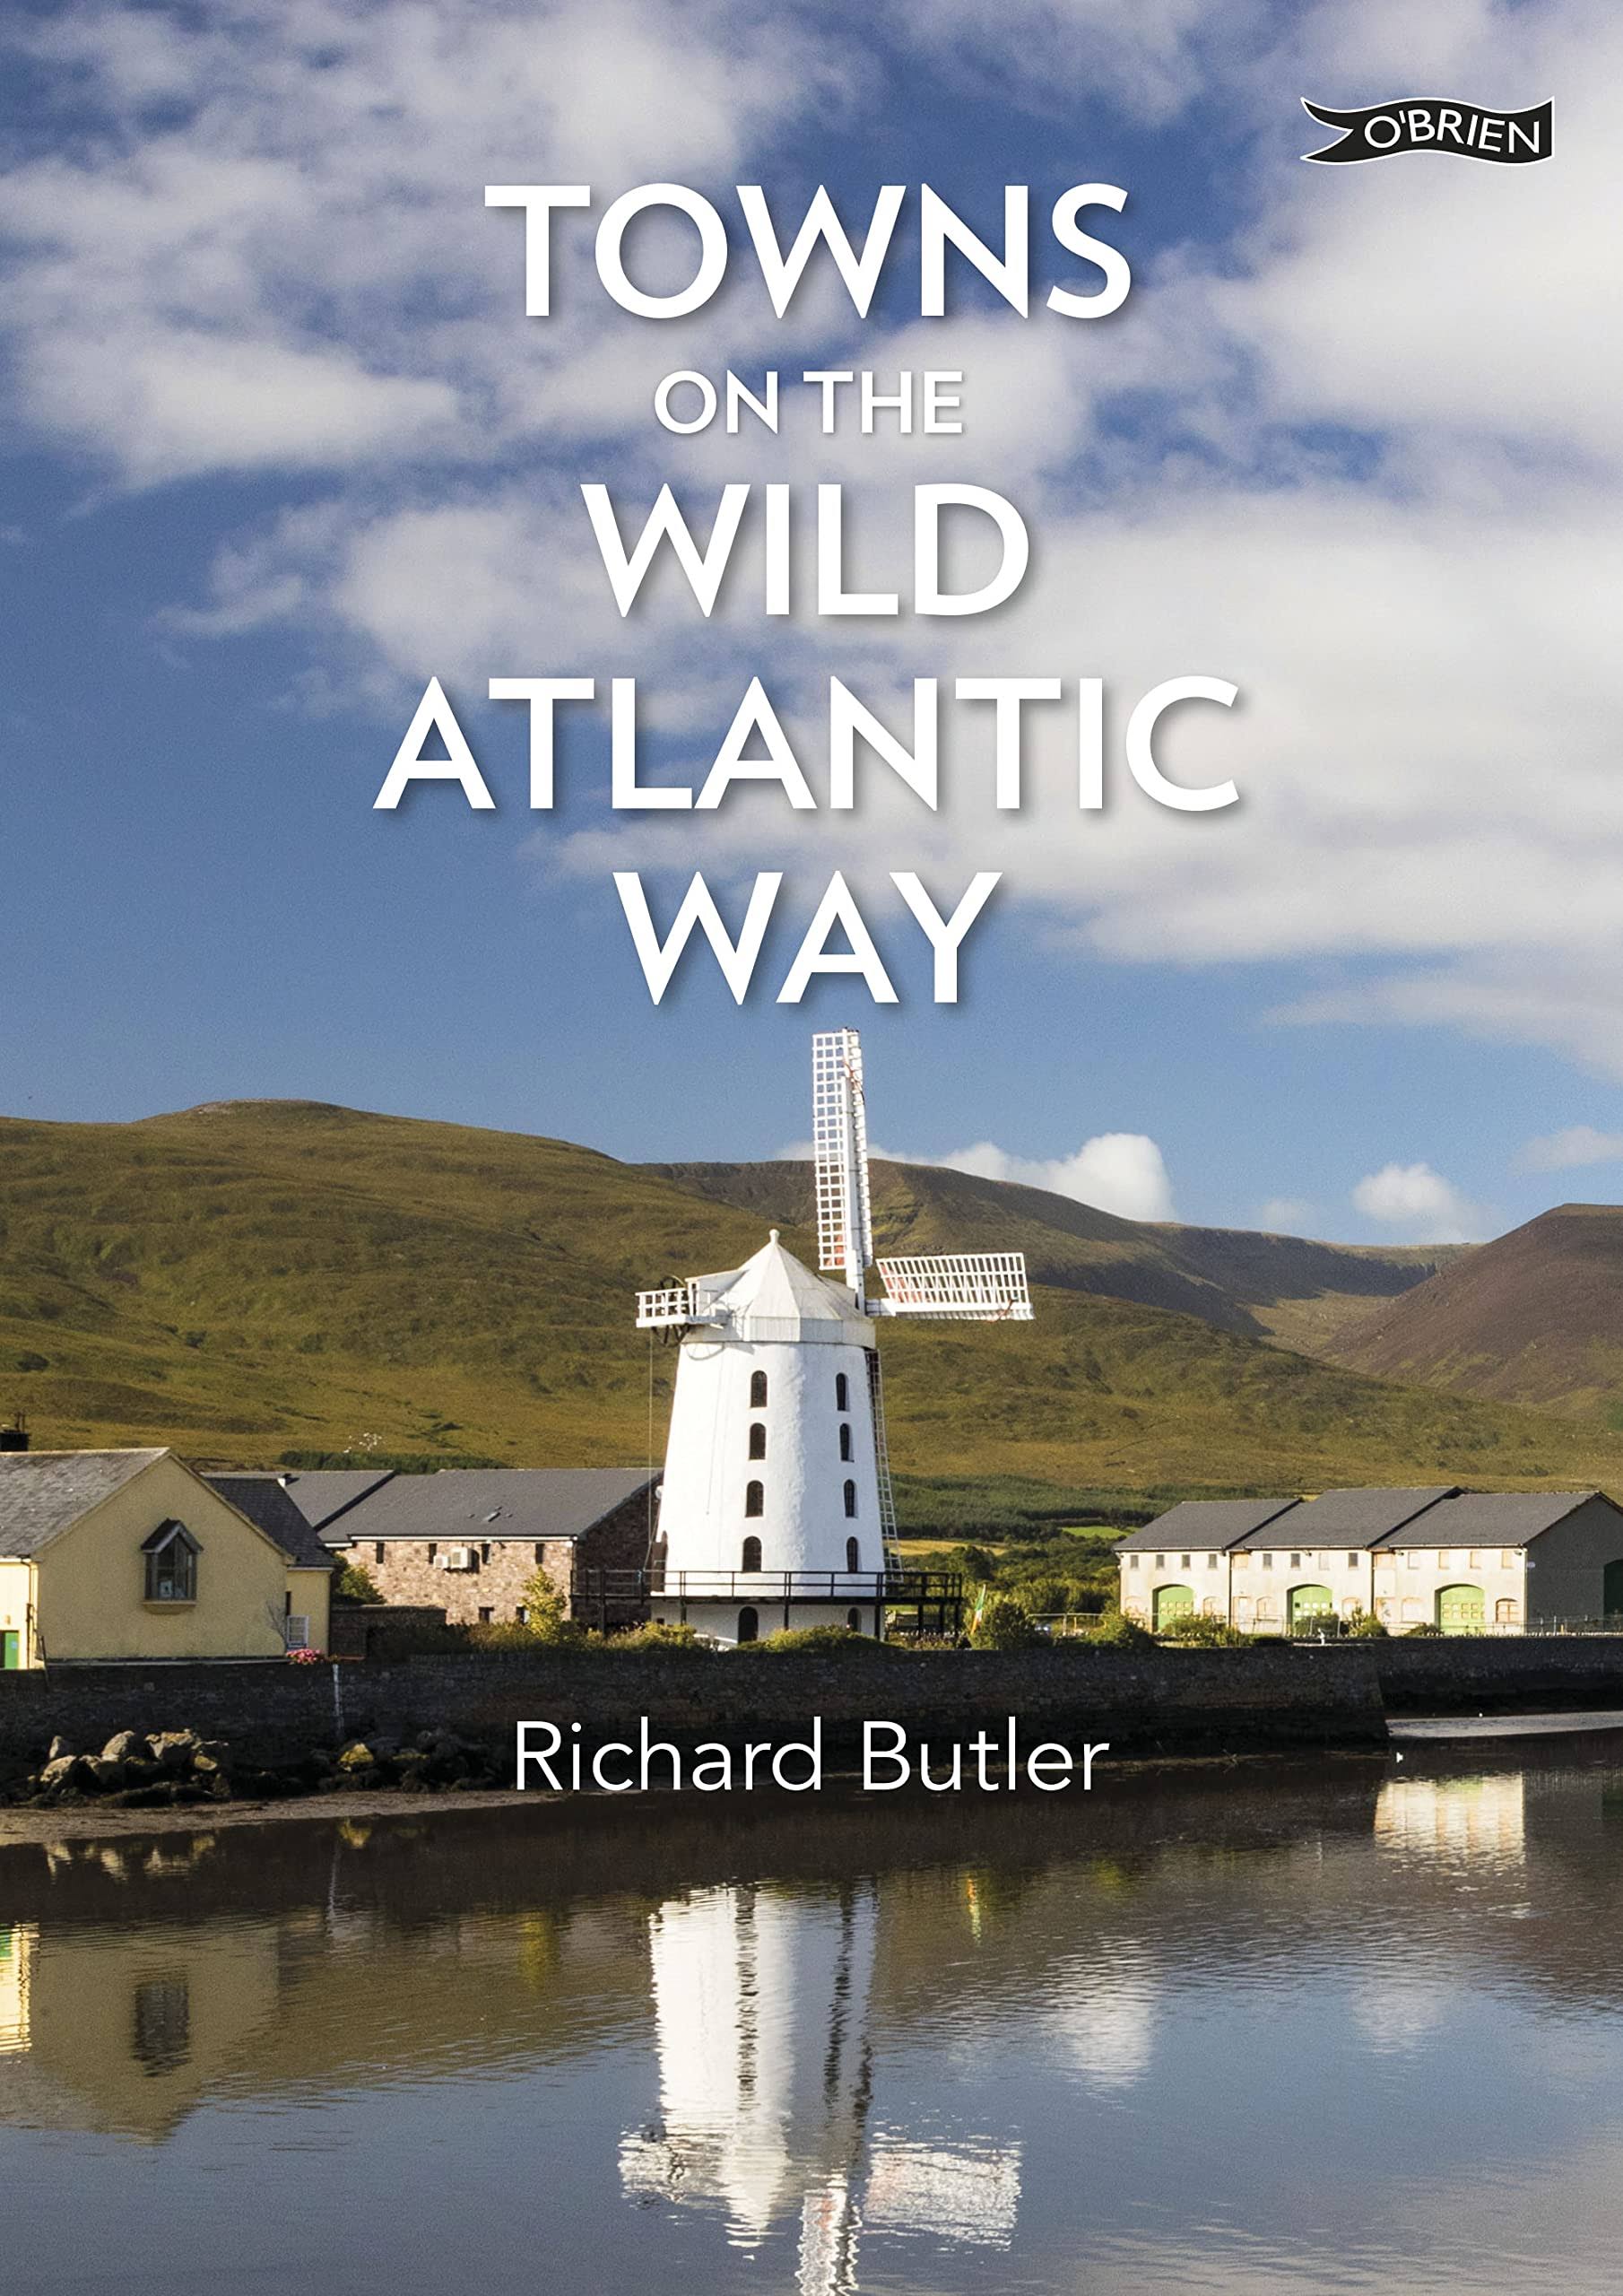 Towns on the Wild Atlantic Way [Book]